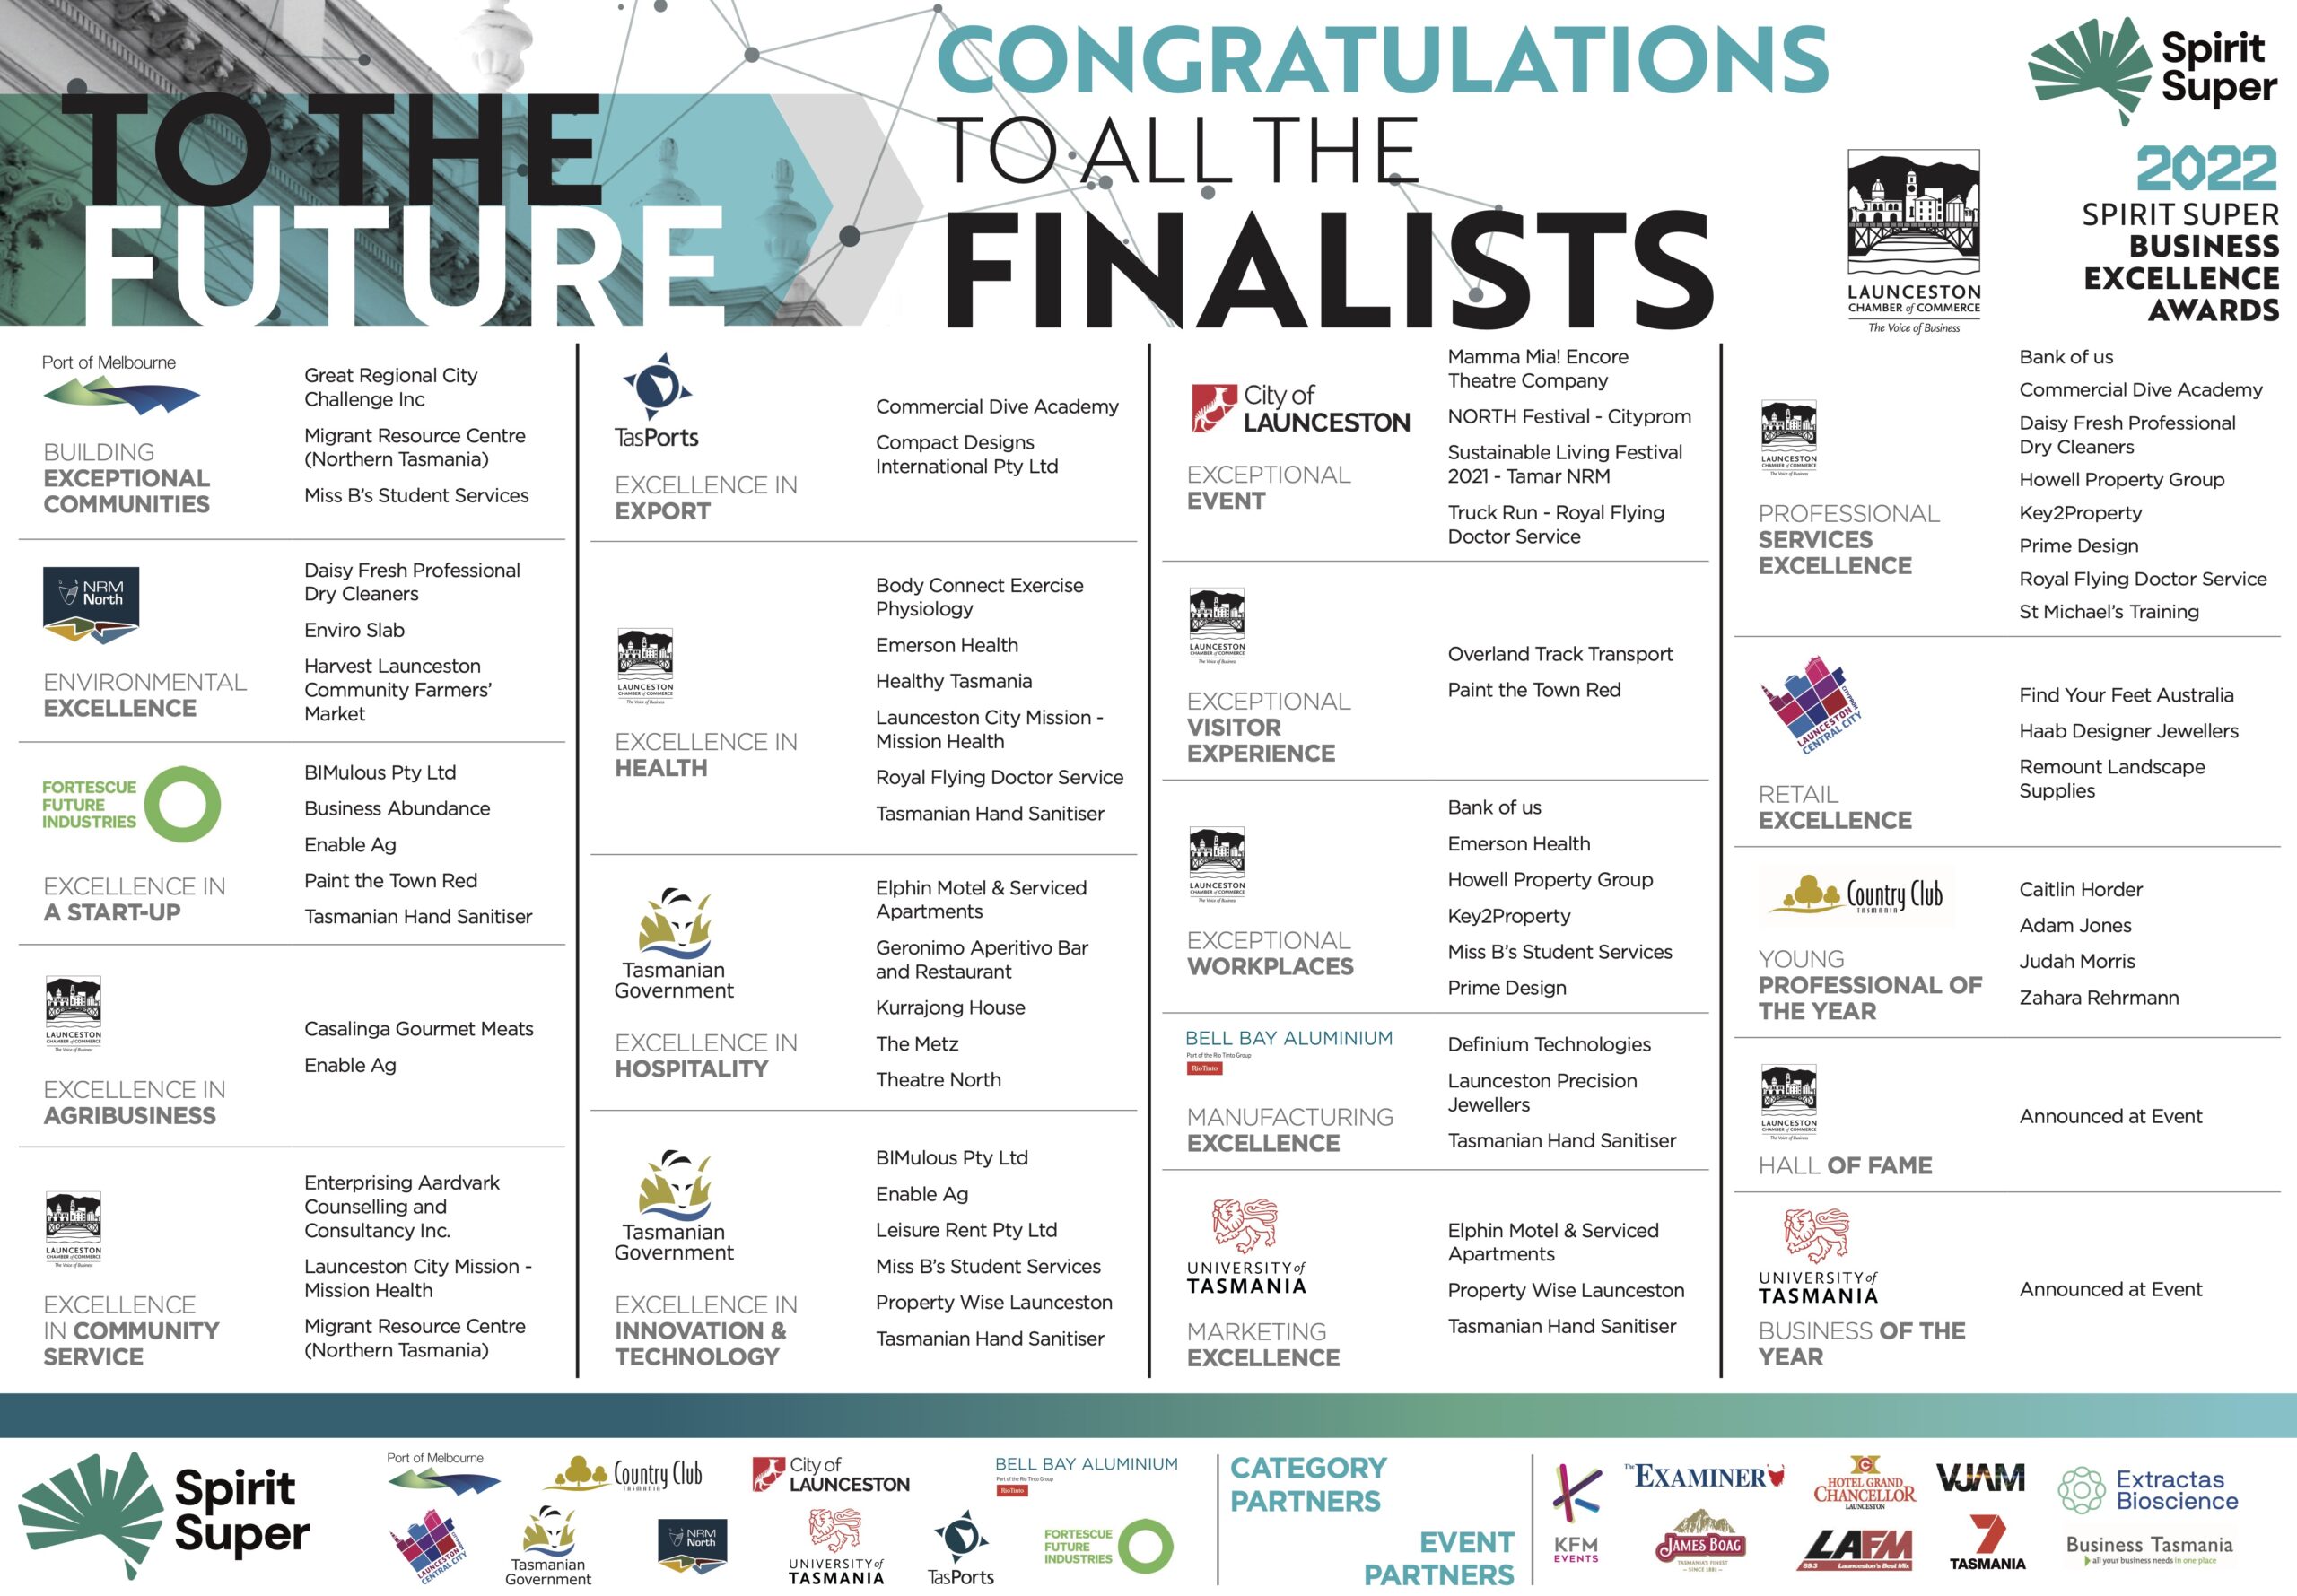 Our full list of finalists